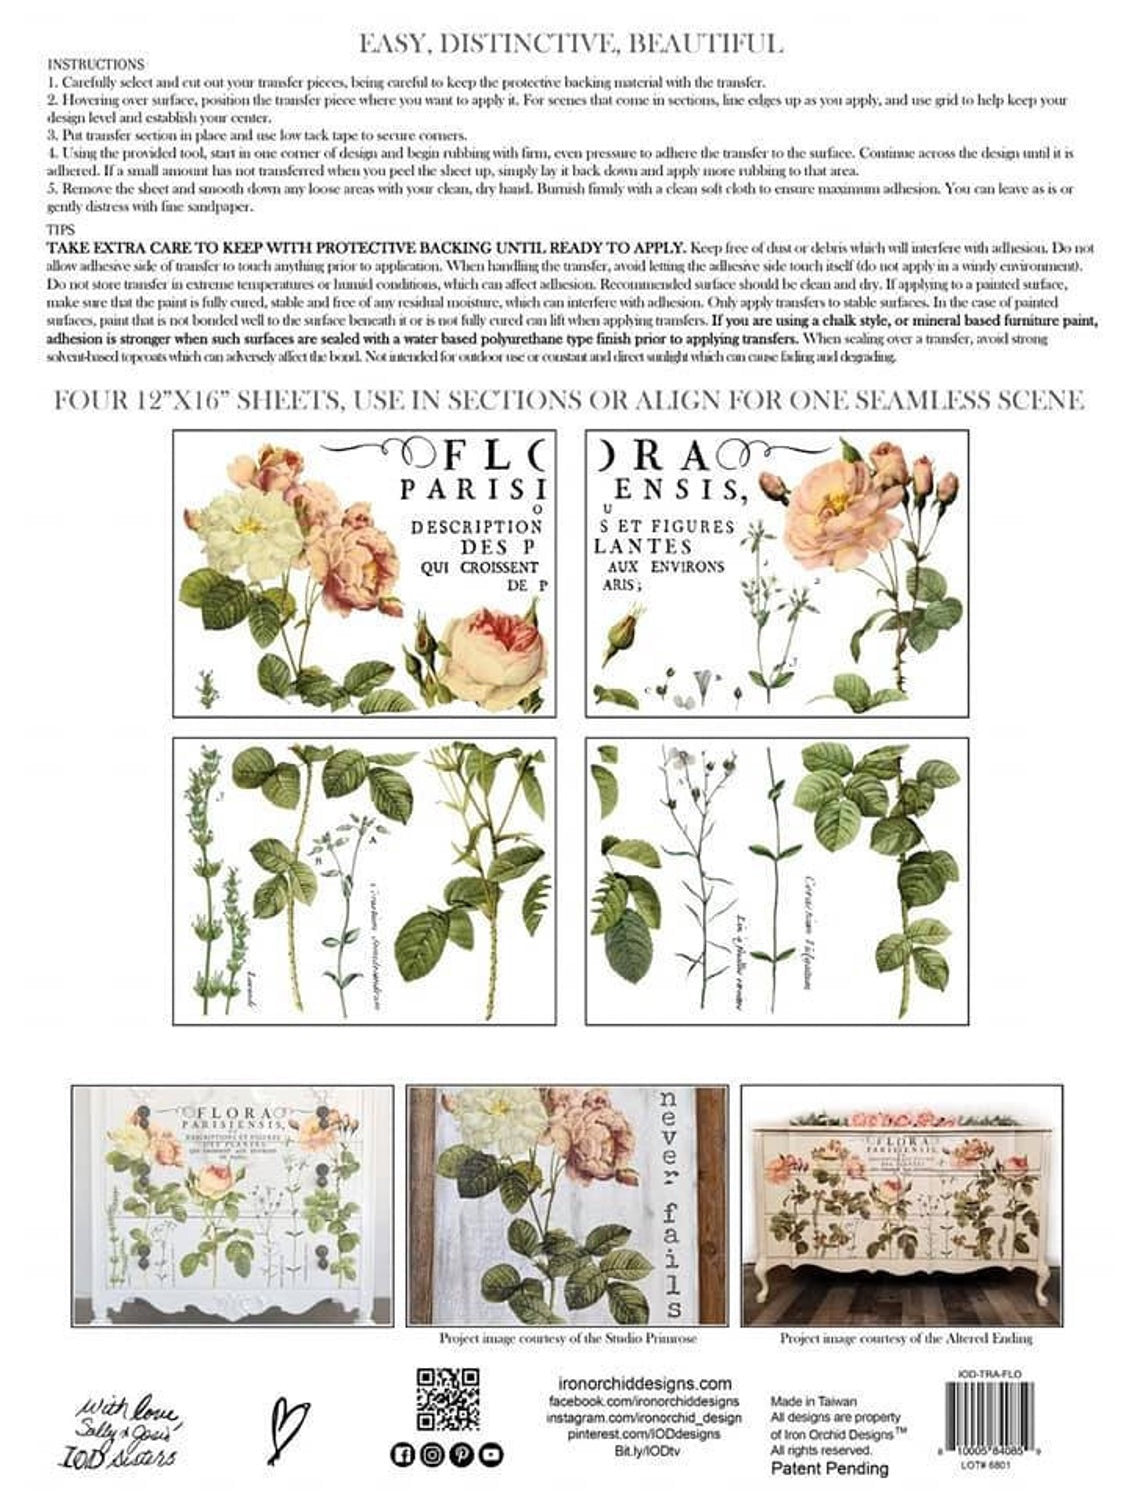 IOD transfer Floral Parisiensis Transfer pad with (4) 12 X 16 Sheets by Iron Orchid Designs Furniture transfer decal